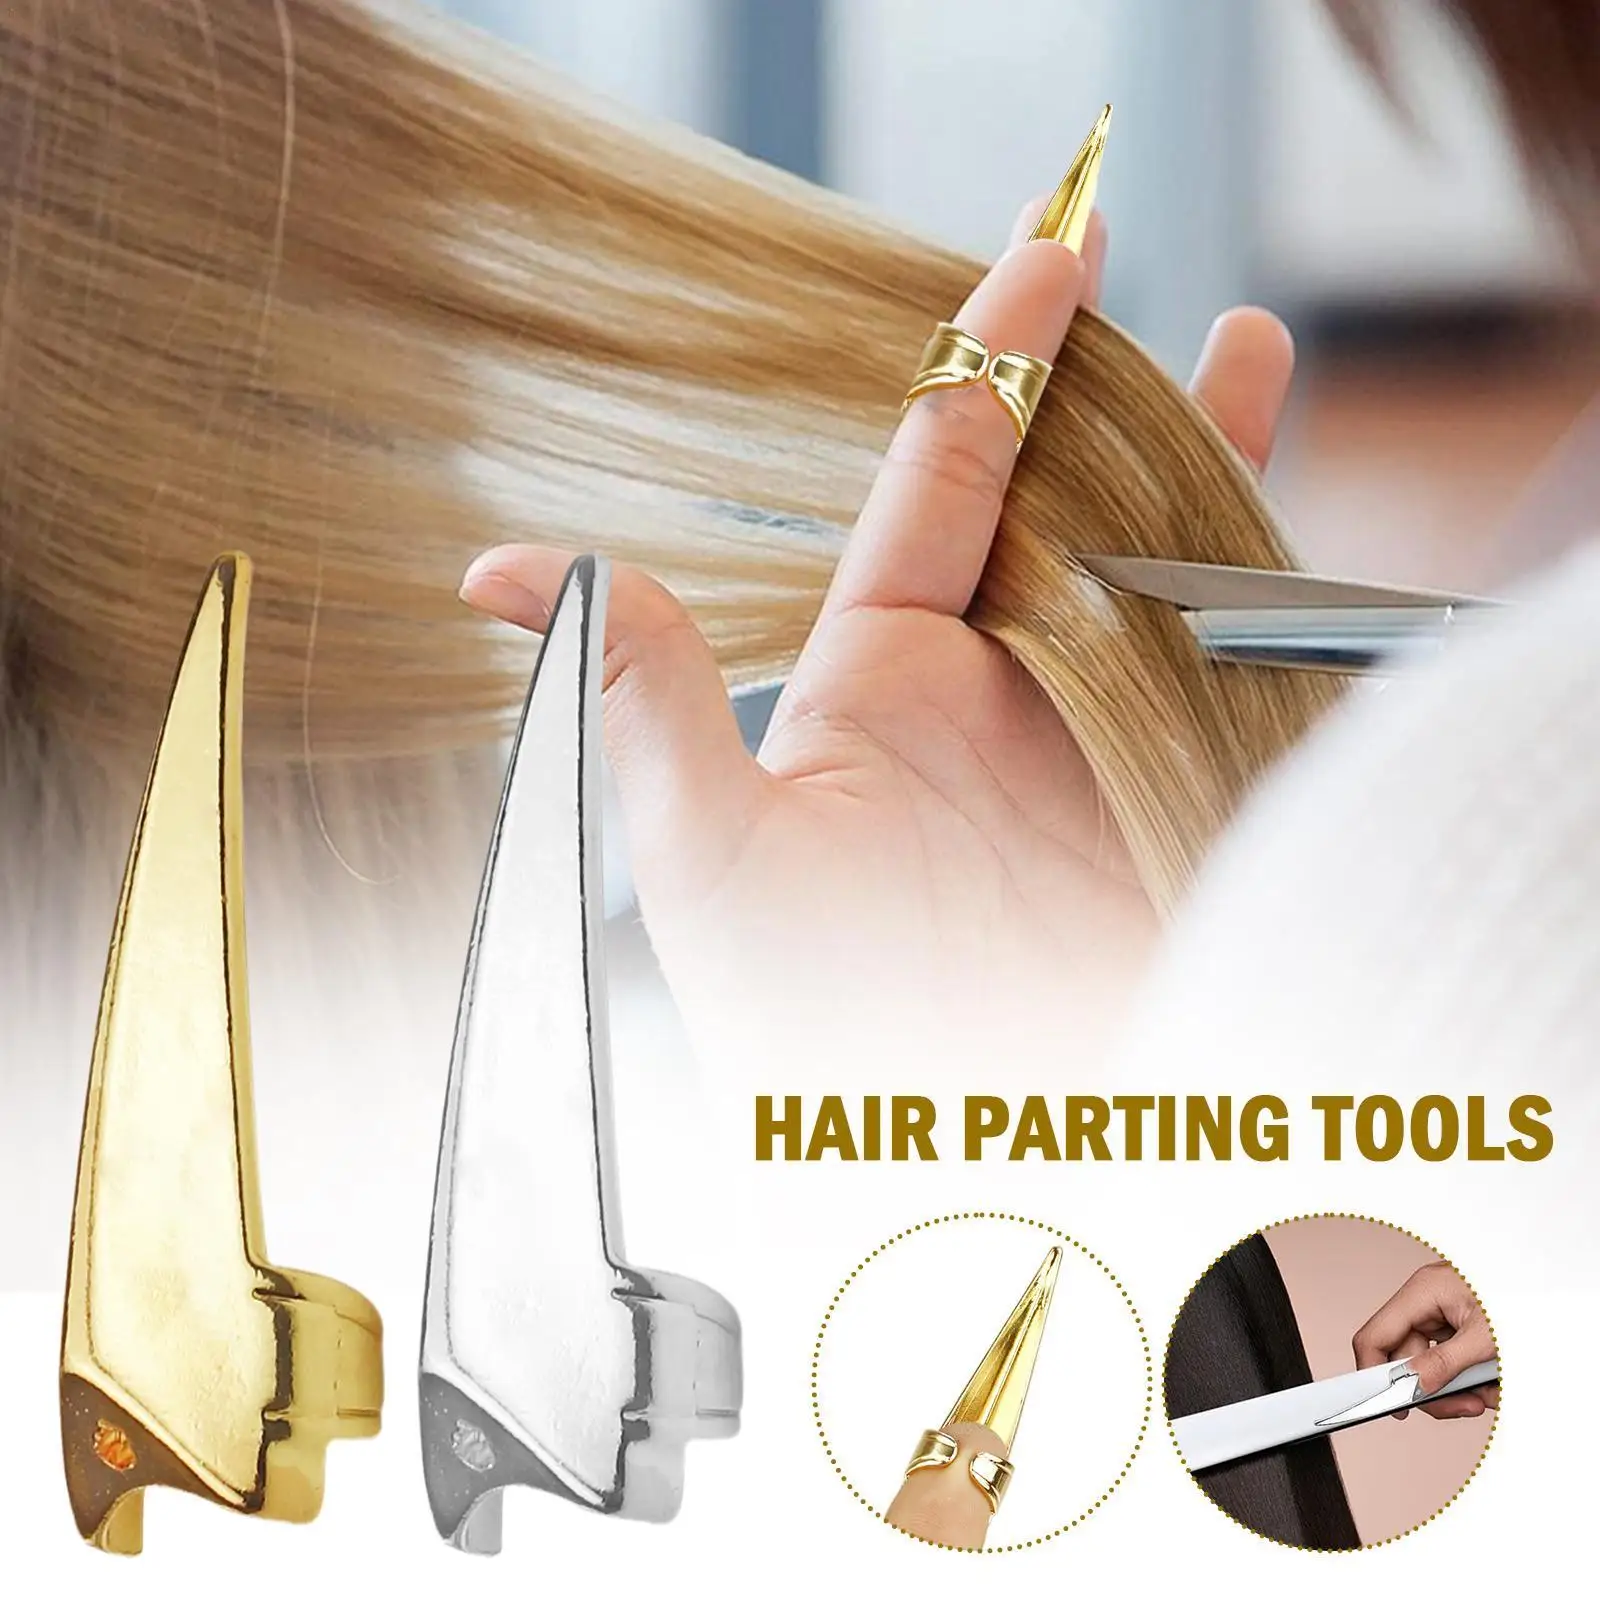 

Metal Parting Finger Tip Ring Hair Sectioning Comb Curling Hair Selecting Hair Braiding Tool Hair Weaving Accessories G7L1